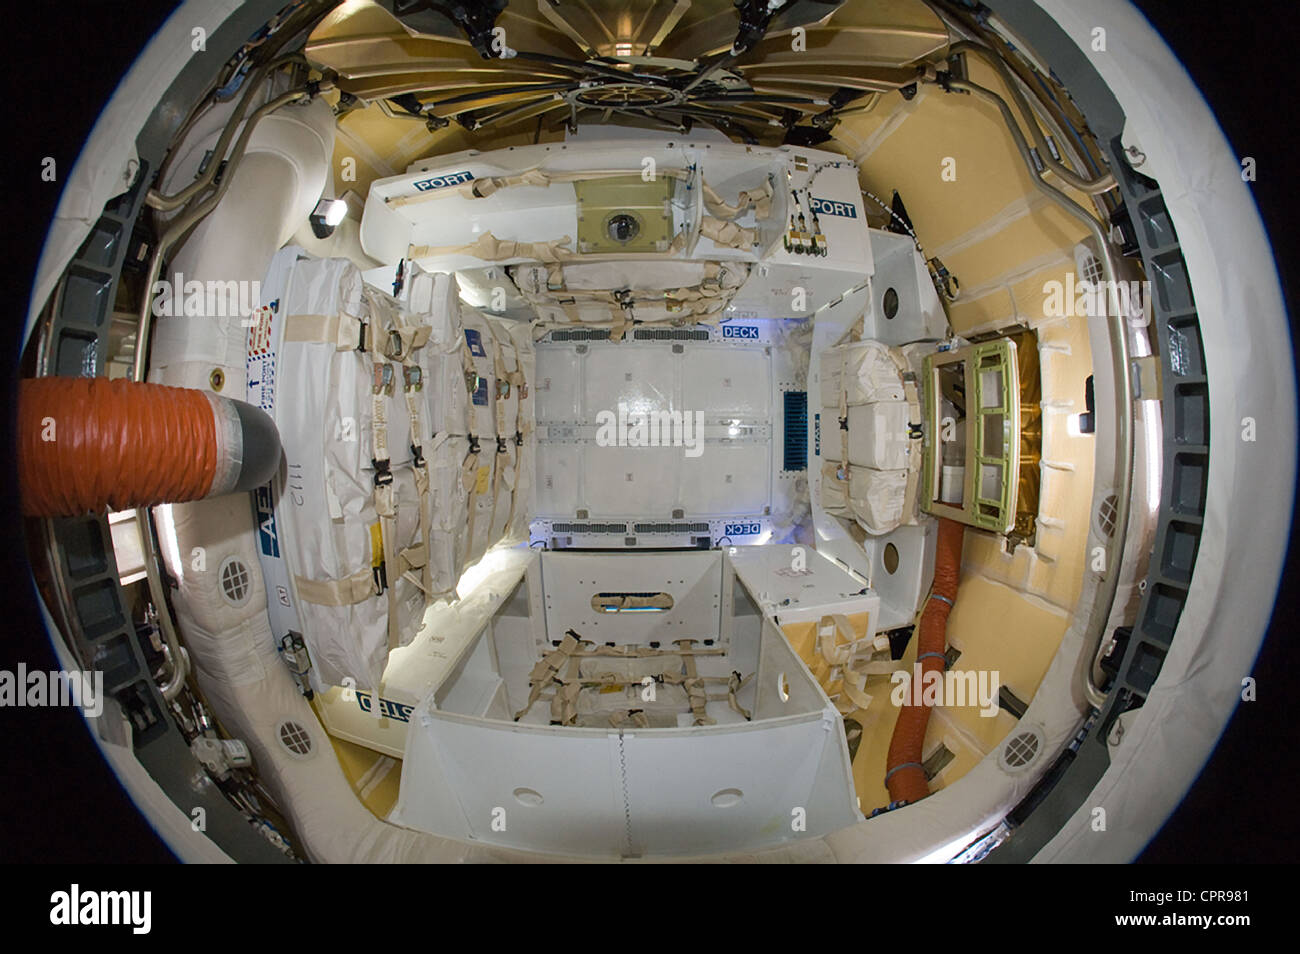 A Fisheye View Of The Inside Of The Spacex Dragon Cargo